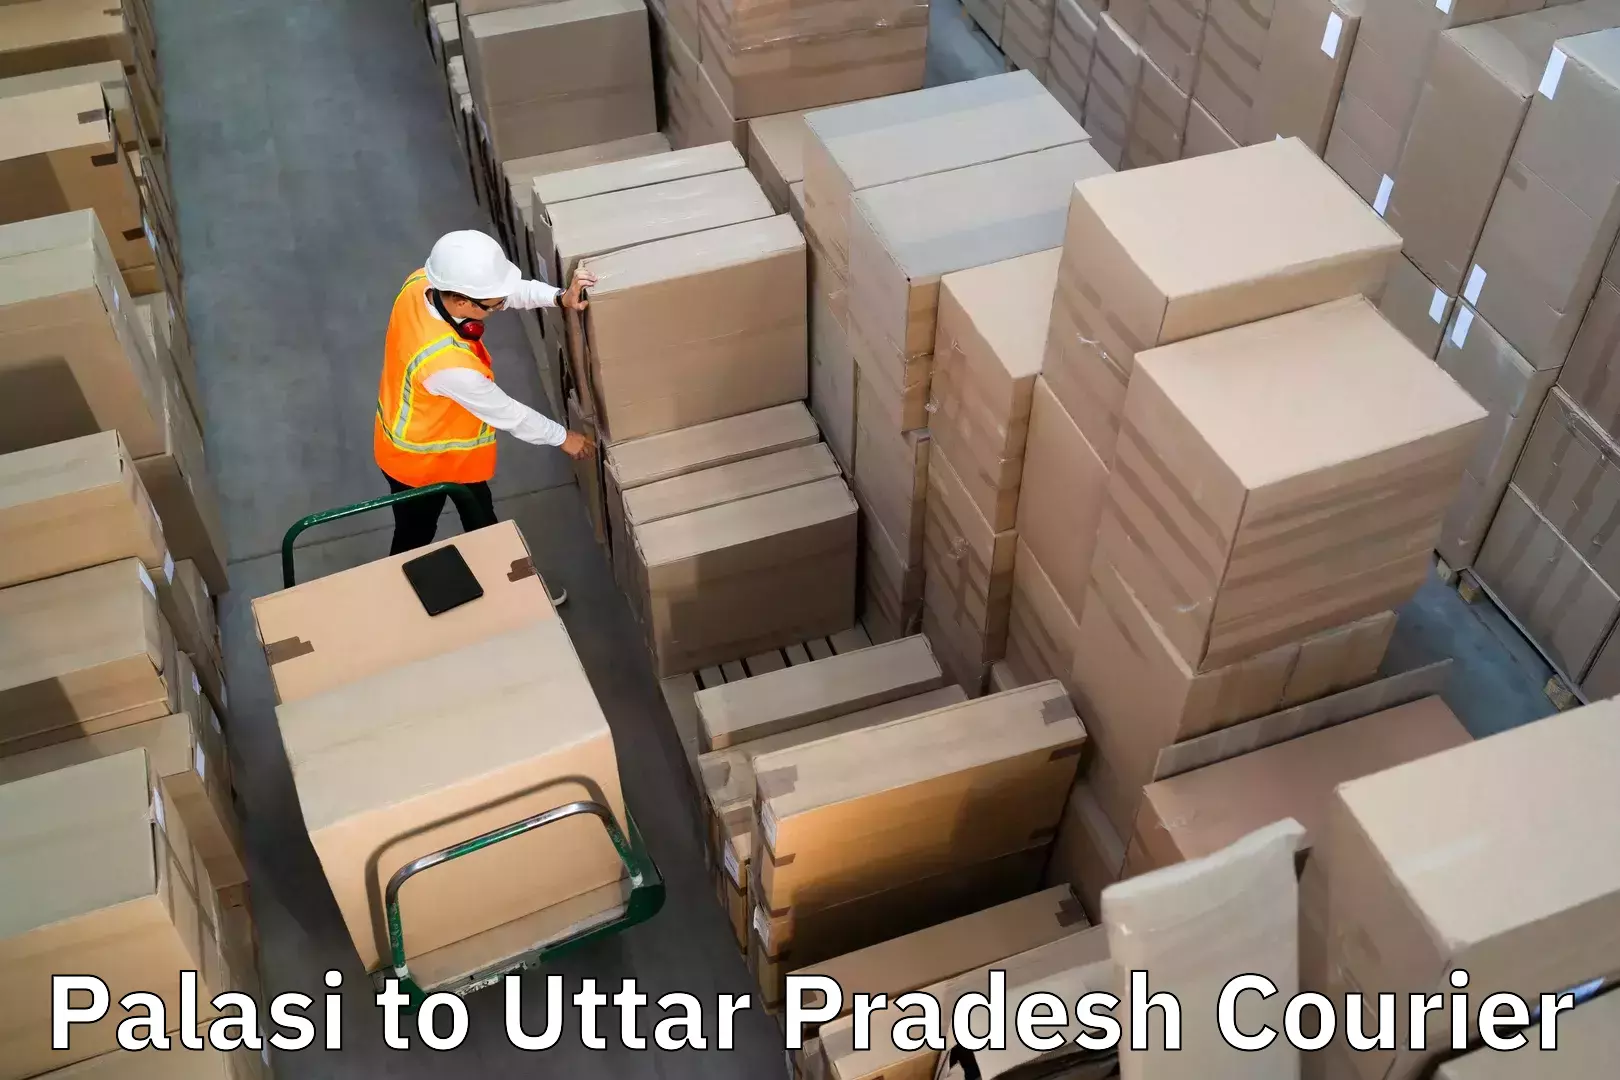 Luggage transfer service in Palasi to Fatehabad Agra